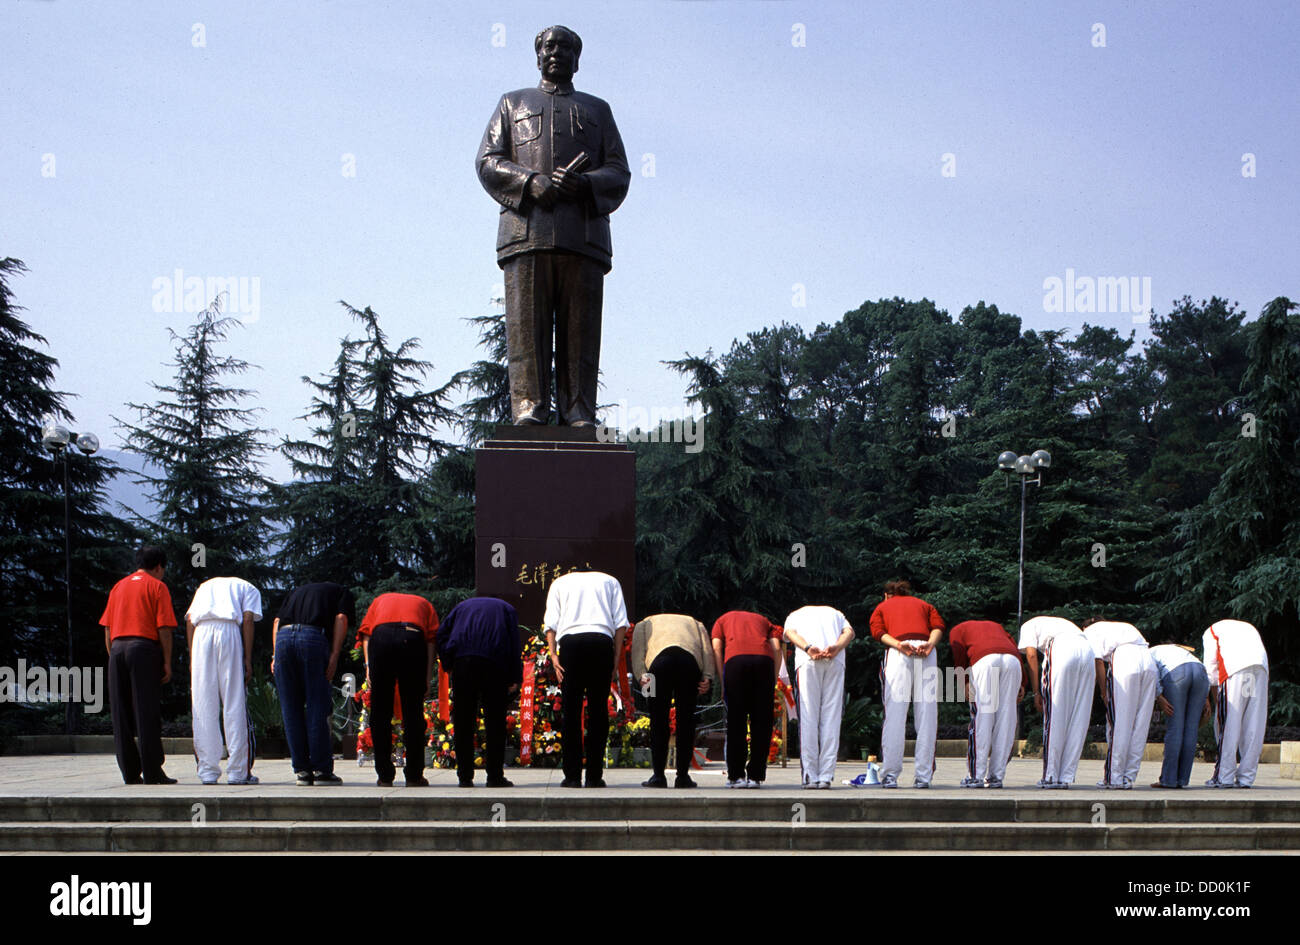 Chinese visitors bowing to Mao Zedong statue in the town of Shaoshan in which Mao Zedong or Mao Tse-tung also known as Chairman Mao was born and spent his childhood located on the mid-eastern Hunan and the mid-north of Xiangtan in China Stock Photo